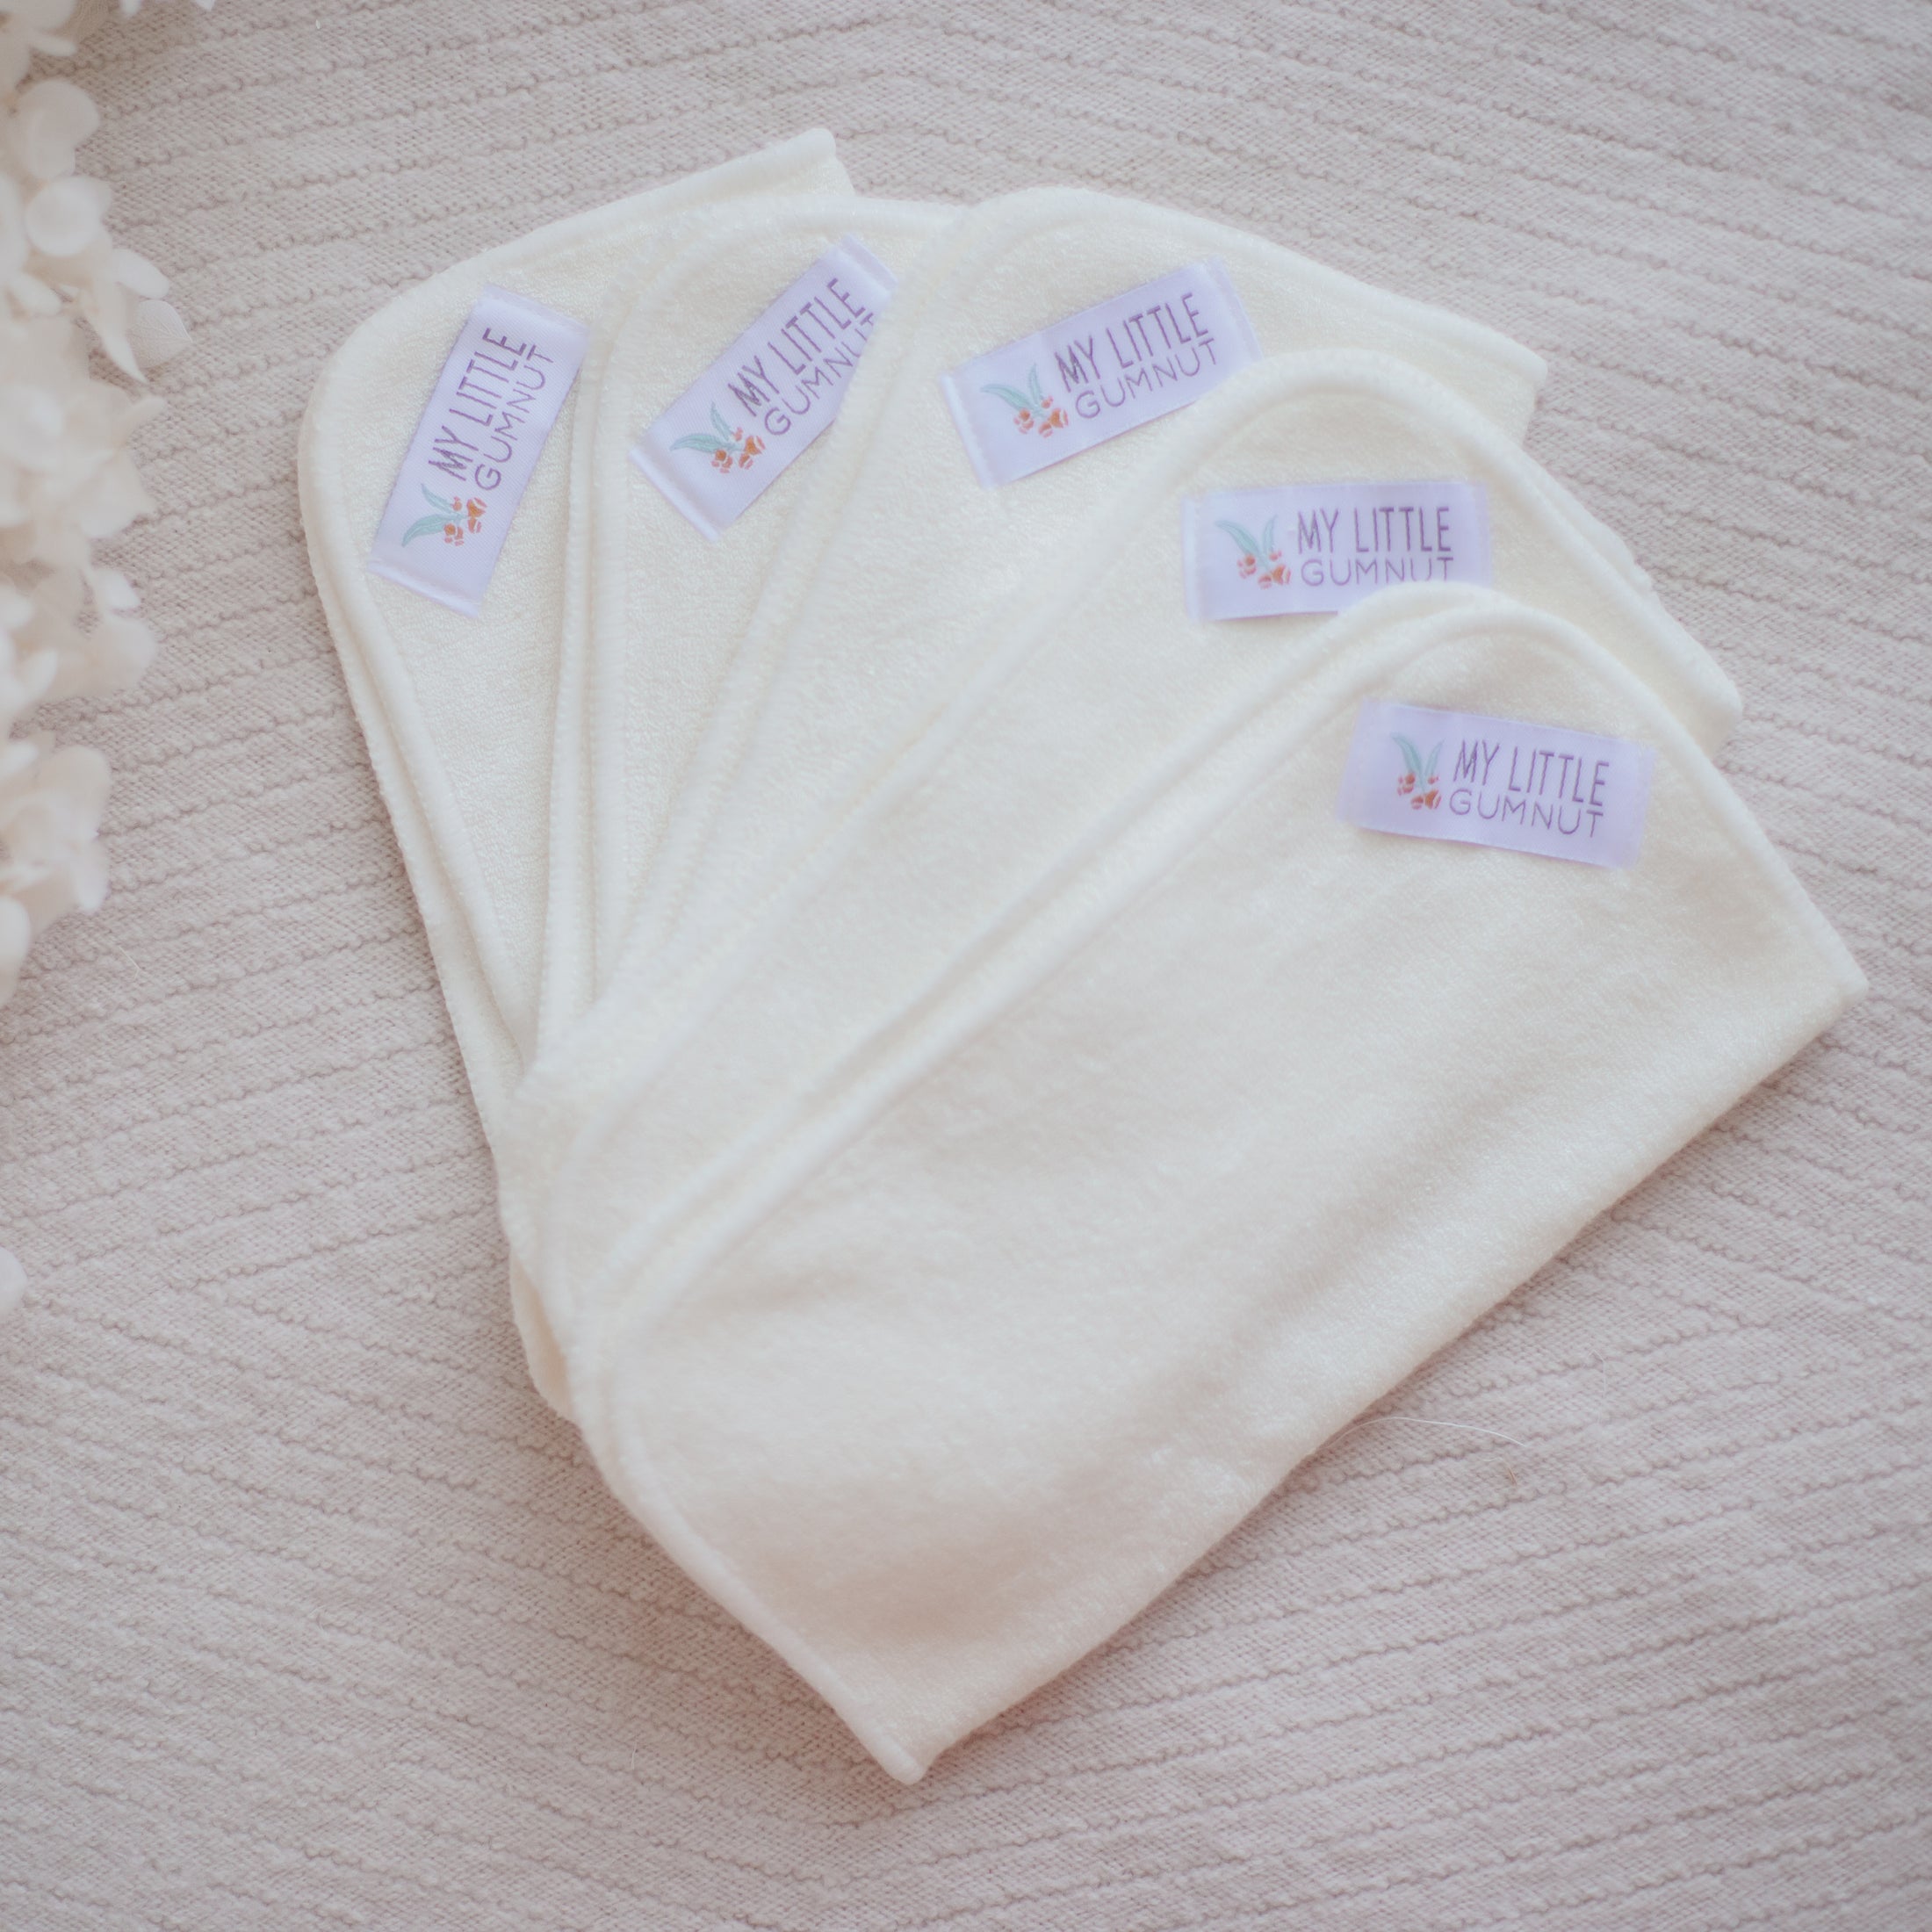 Cloth nappy wipes by My Little gumnut. Reusable bamboo nappy wipes